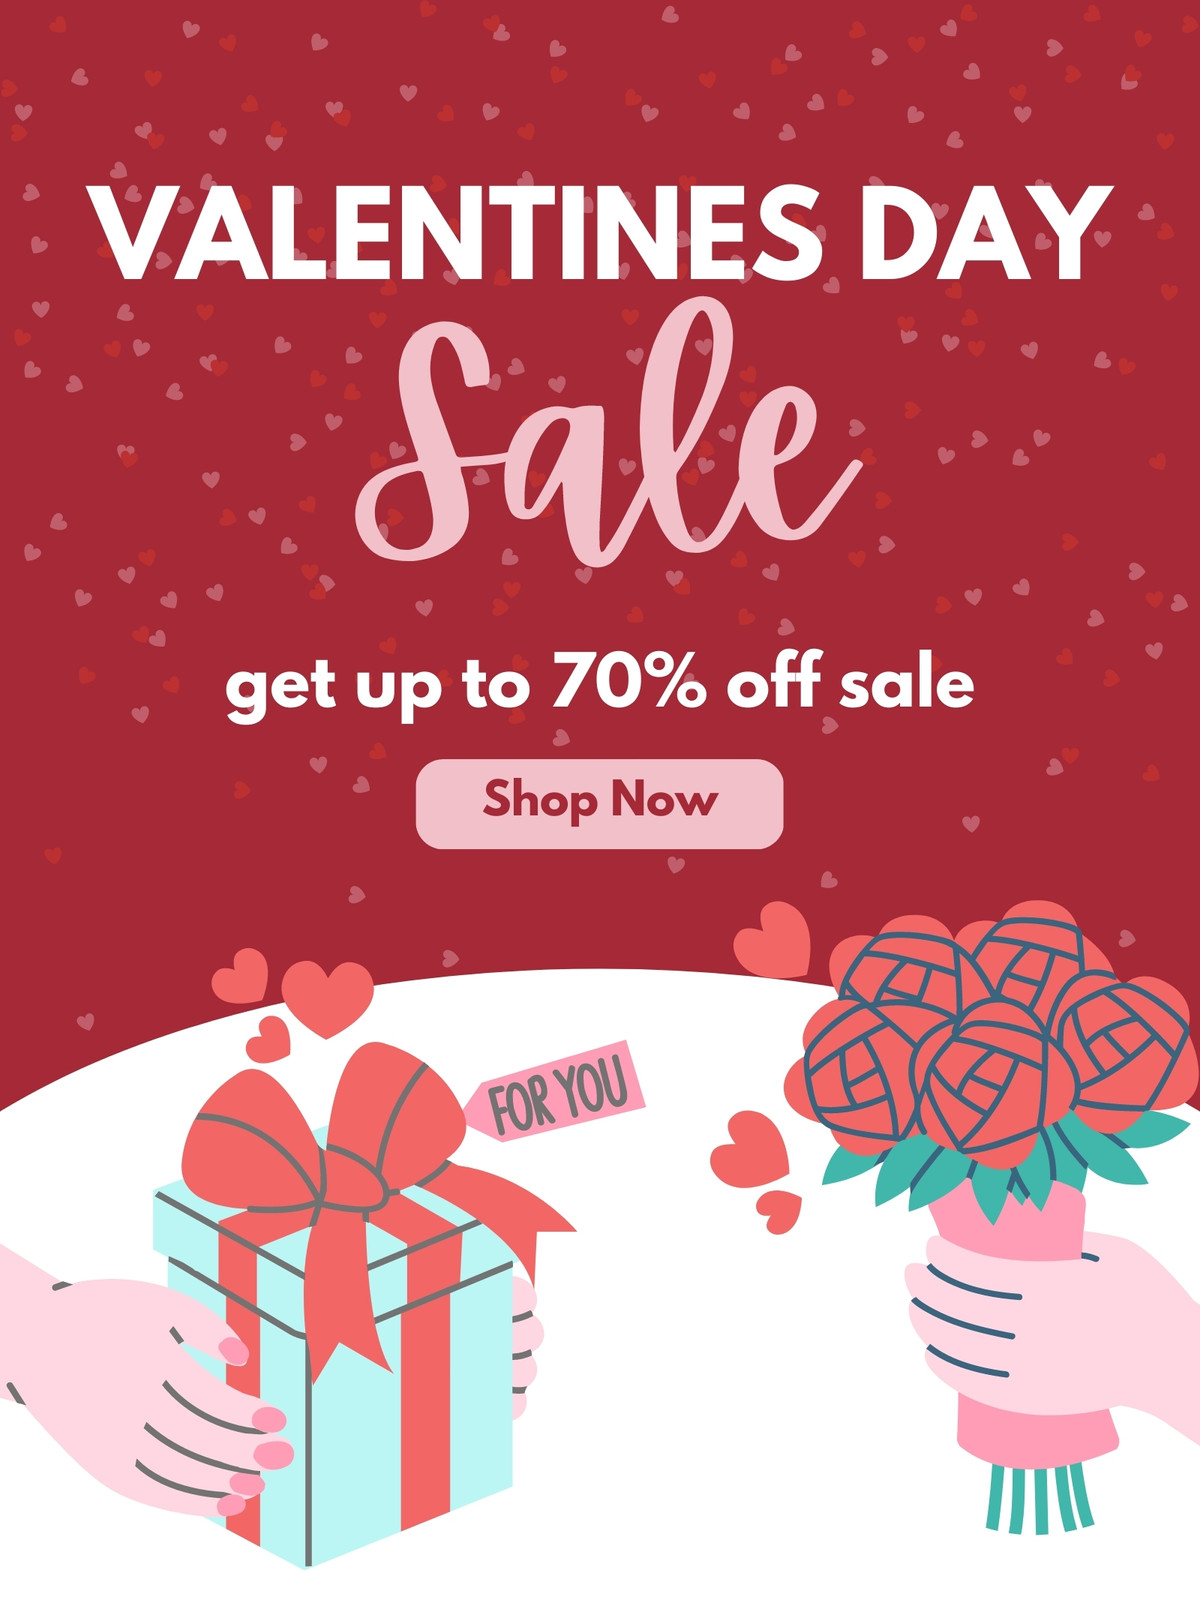 Free printable Valentine's Day poster templates | Canva